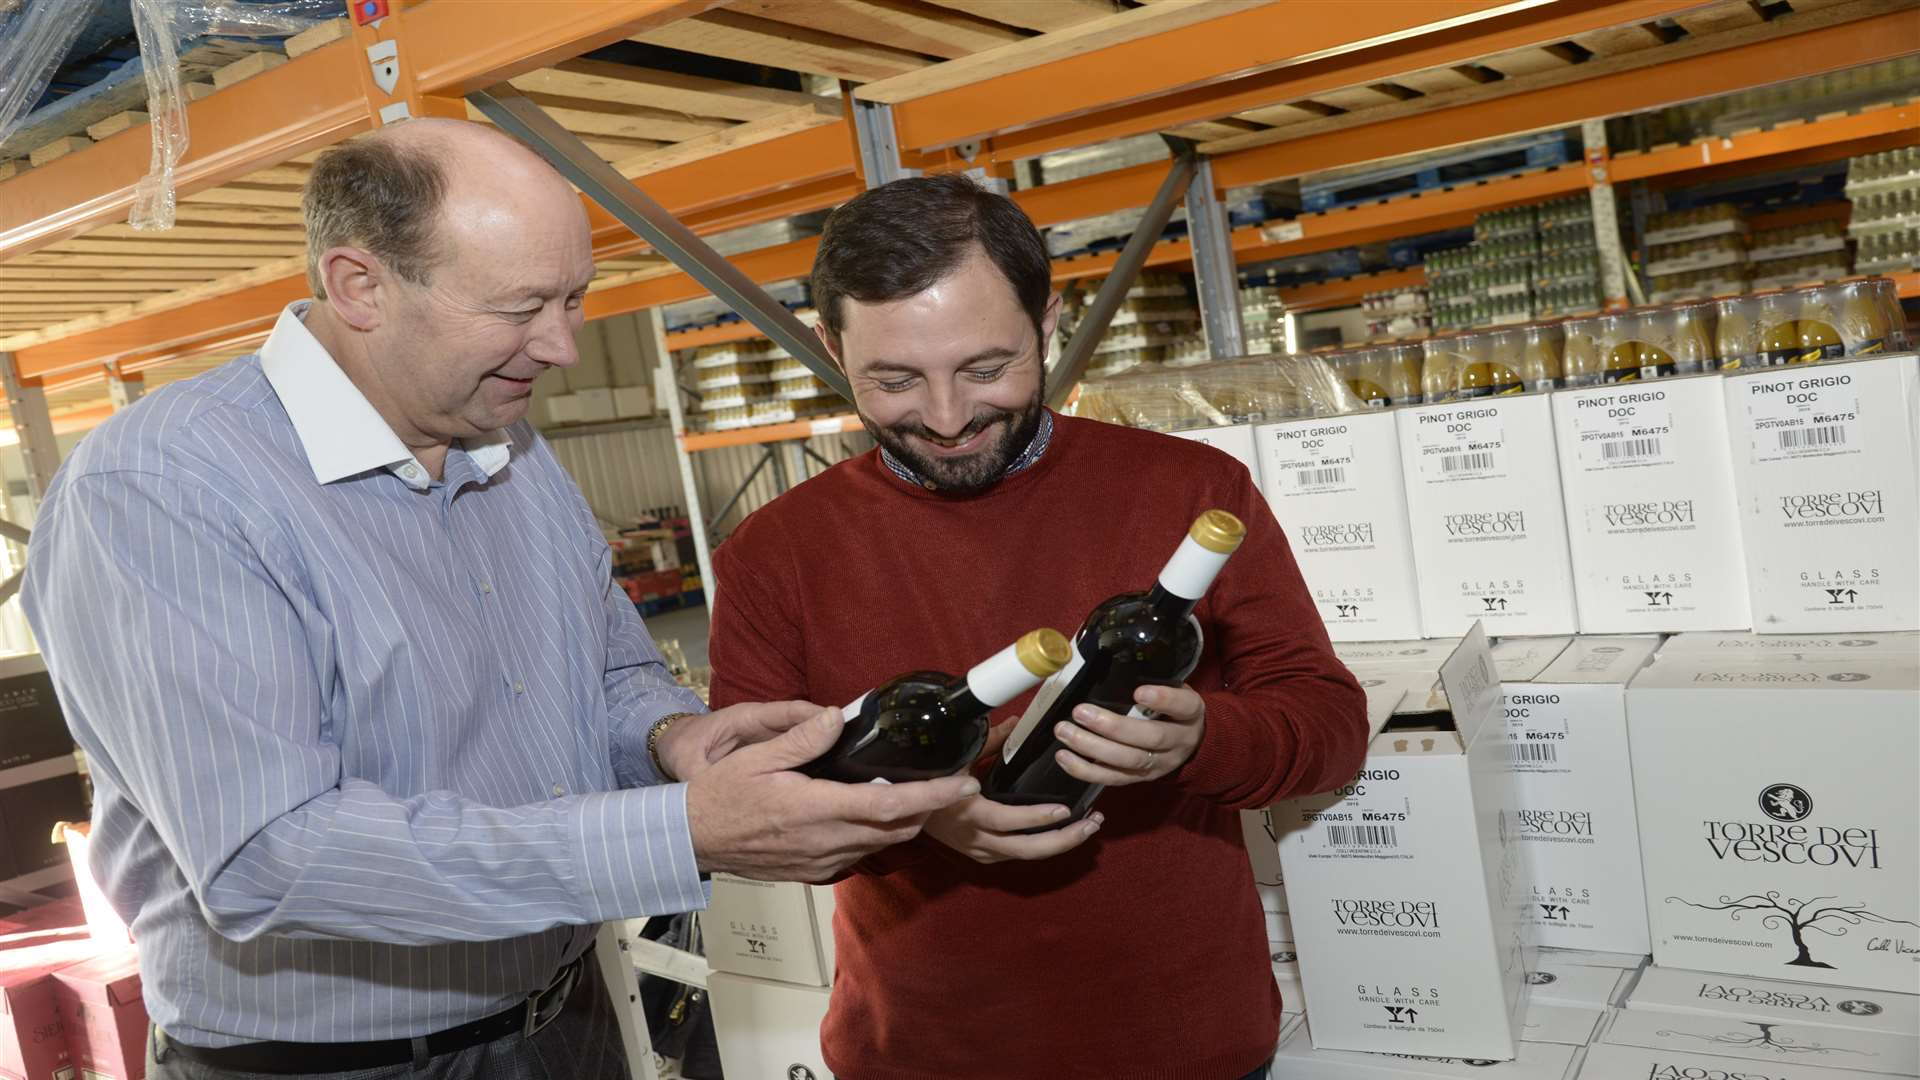 Drink Warehouse UK operations manager Andy Butler, left, and director Mick Curtis